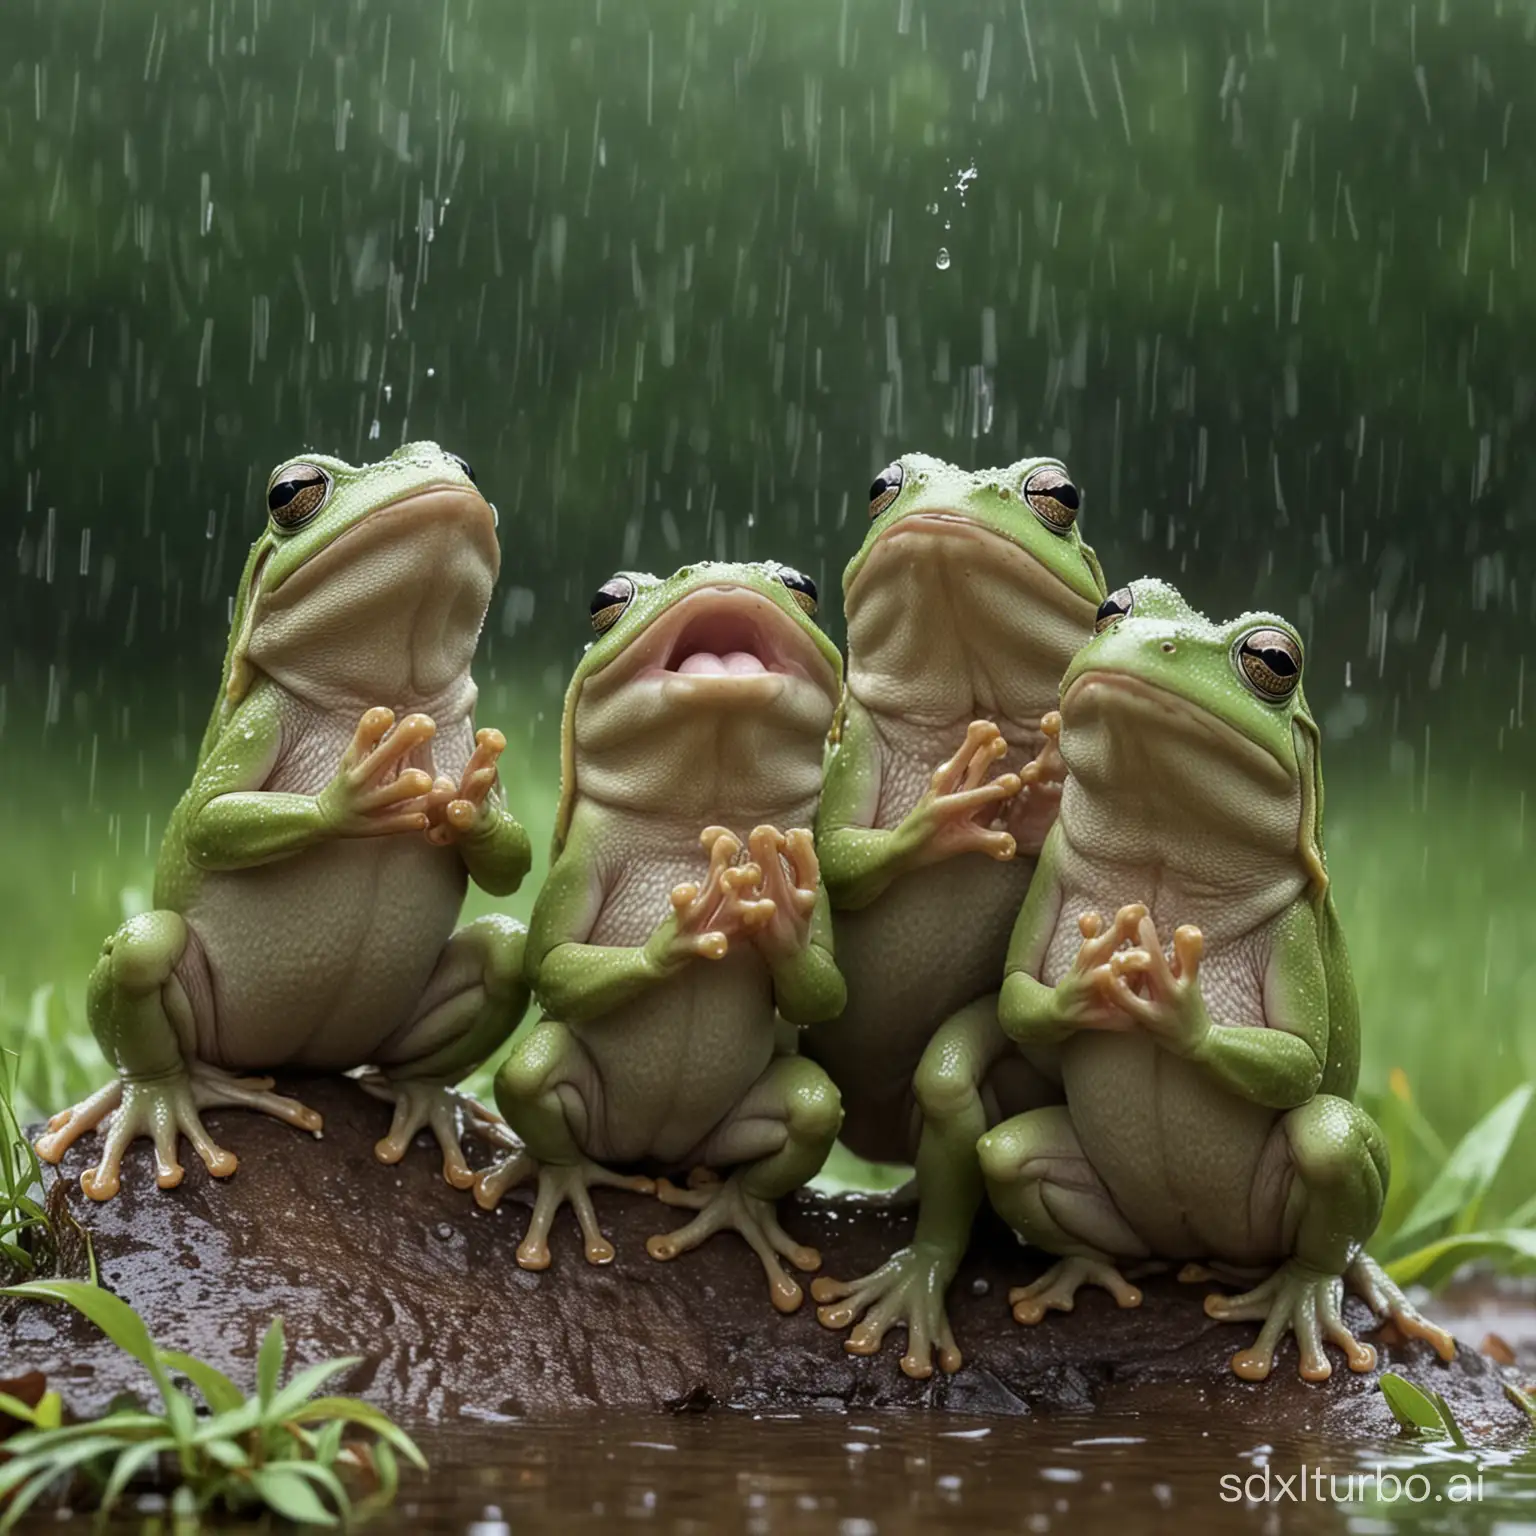 A group of frogs gather together singing and praying for rain.